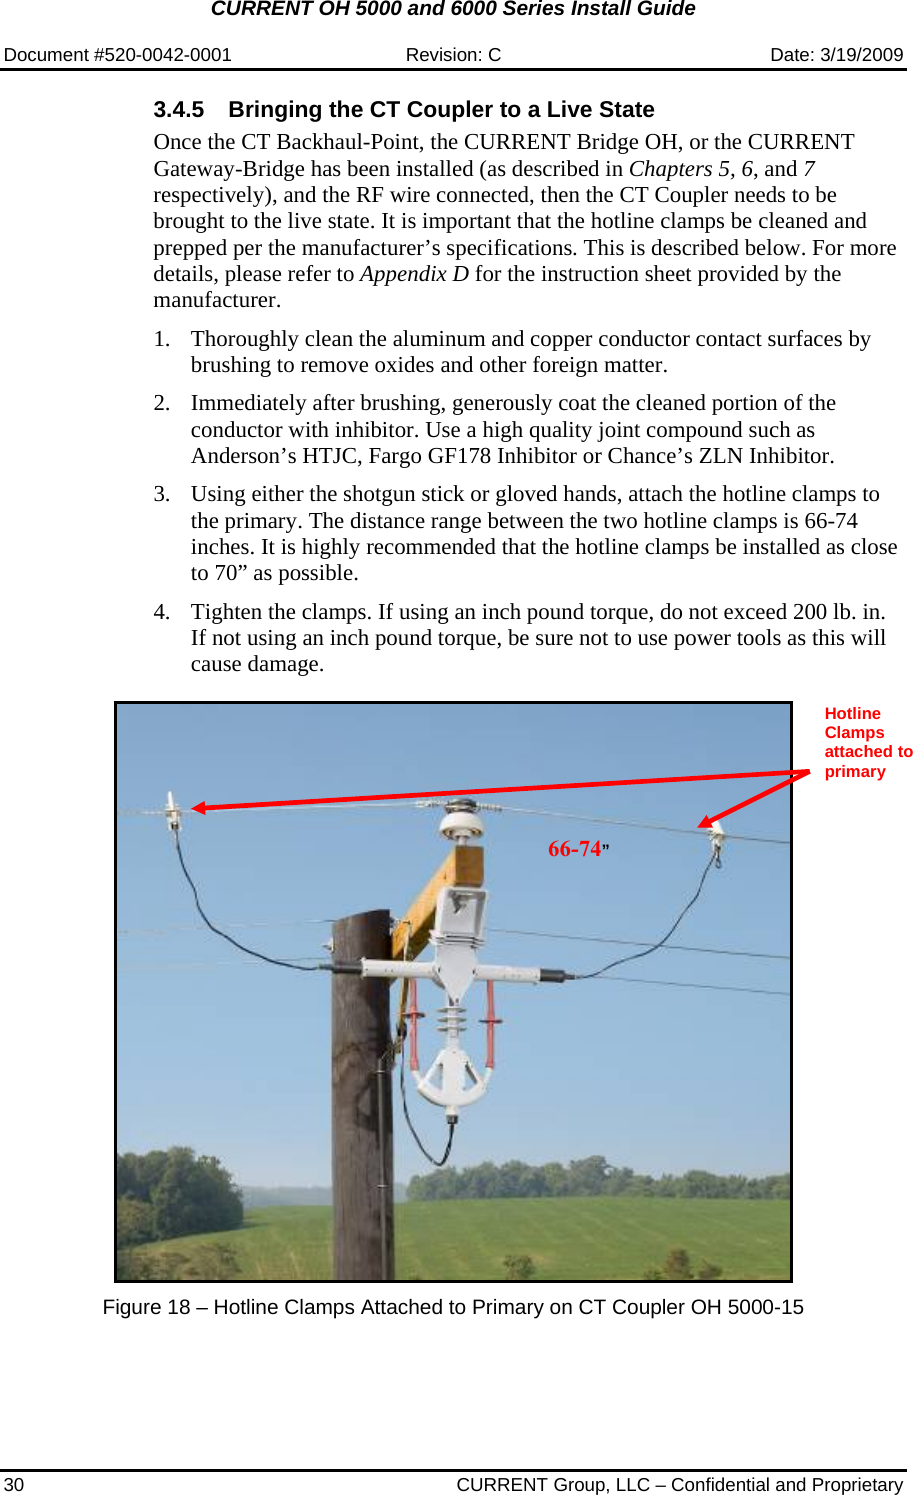 CURRENT OH 5000 and 6000 Series Install Guide  Document #520-0042-0001  Revision: C  Date: 3/19/2009 30  CURRENT Group, LLC – Confidential and Proprietary 3.4.5  Bringing the CT Coupler to a Live State Once the CT Backhaul-Point, the CURRENT Bridge OH, or the CURRENT Gateway-Bridge has been installed (as described in Chapters 5, 6, and 7 respectively), and the RF wire connected, then the CT Coupler needs to be brought to the live state. It is important that the hotline clamps be cleaned and prepped per the manufacturer’s specifications. This is described below. For more details, please refer to Appendix D for the instruction sheet provided by the manufacturer.    1. Thoroughly clean the aluminum and copper conductor contact surfaces by brushing to remove oxides and other foreign matter.  2. Immediately after brushing, generously coat the cleaned portion of the conductor with inhibitor. Use a high quality joint compound such as Anderson’s HTJC, Fargo GF178 Inhibitor or Chance’s ZLN Inhibitor.  3. Using either the shotgun stick or gloved hands, attach the hotline clamps to the primary. The distance range between the two hotline clamps is 66-74 inches. It is highly recommended that the hotline clamps be installed as close to 70” as possible.  4. Tighten the clamps. If using an inch pound torque, do not exceed 200 lb. in. If not using an inch pound torque, be sure not to use power tools as this will cause damage.     Figure 18 – Hotline Clamps Attached to Primary on CT Coupler OH 5000-15  Hotline Clamps attached to primary 66-74”